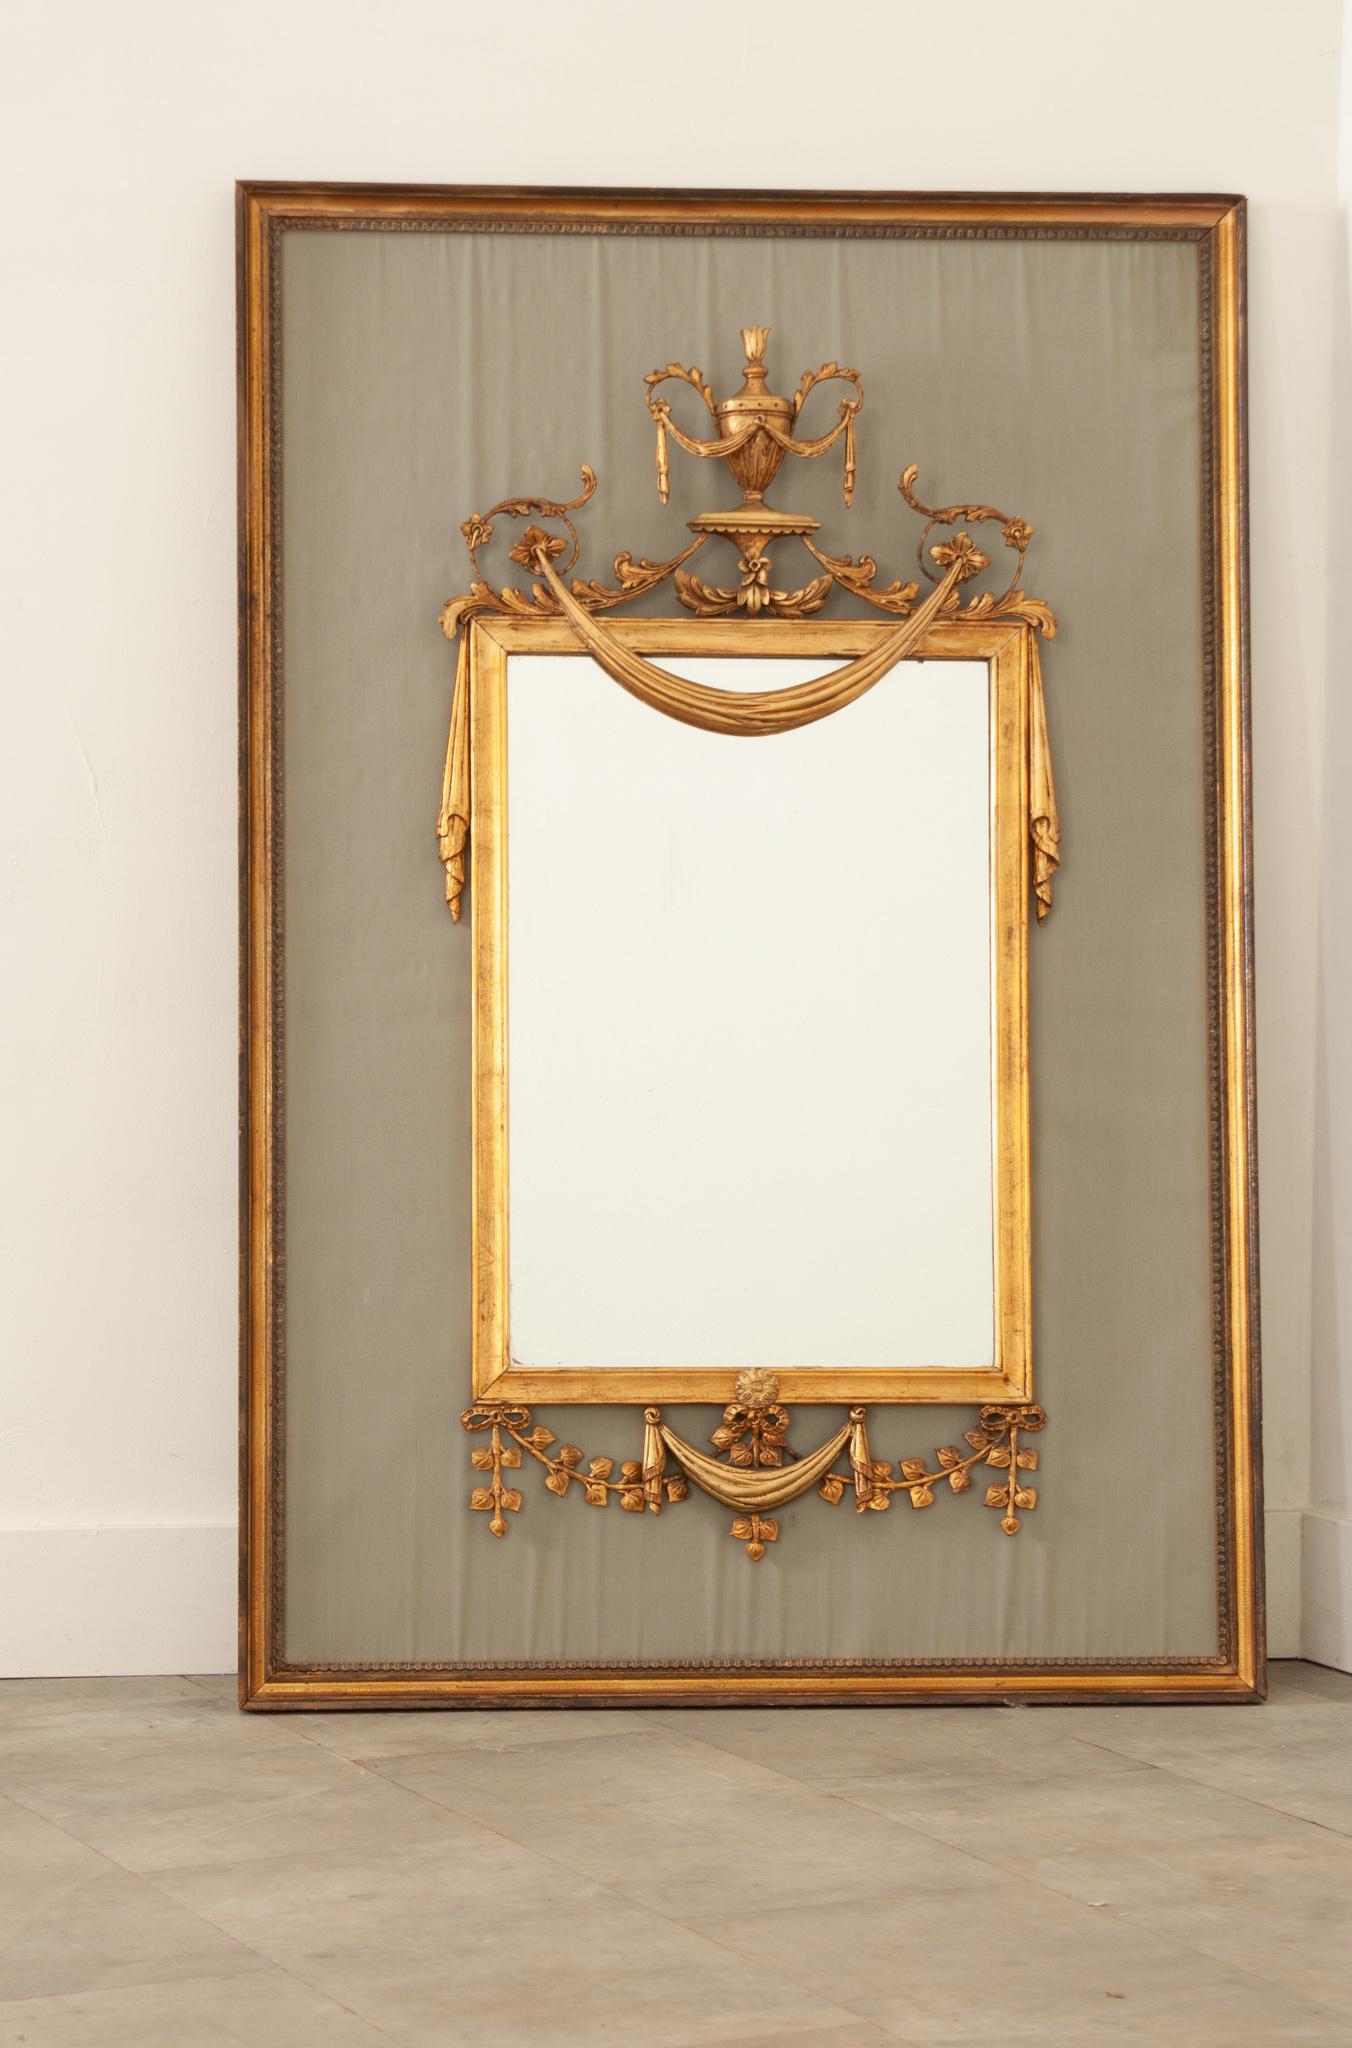 This Louis XV style mirror is an absolute gem of a find. The original mirror plate is supported in a beautifully carved gilt frame that’s dripping with garland and drapery, mounted over a recently made framed fabric panel. Fixed with a wire and